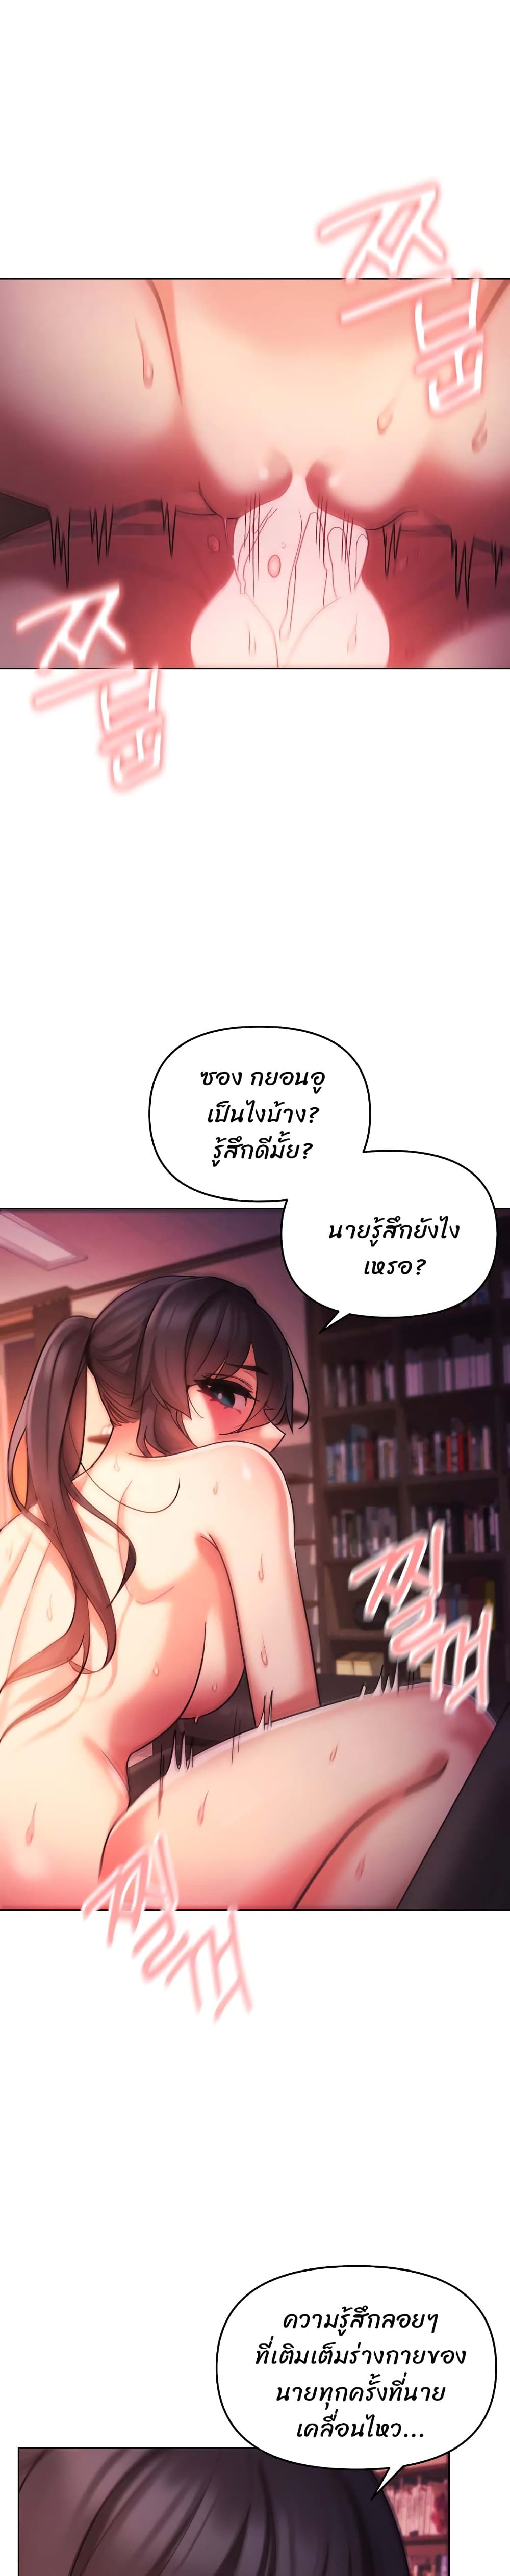 College Life Starts With Clubs 55 ภาพที่ 3